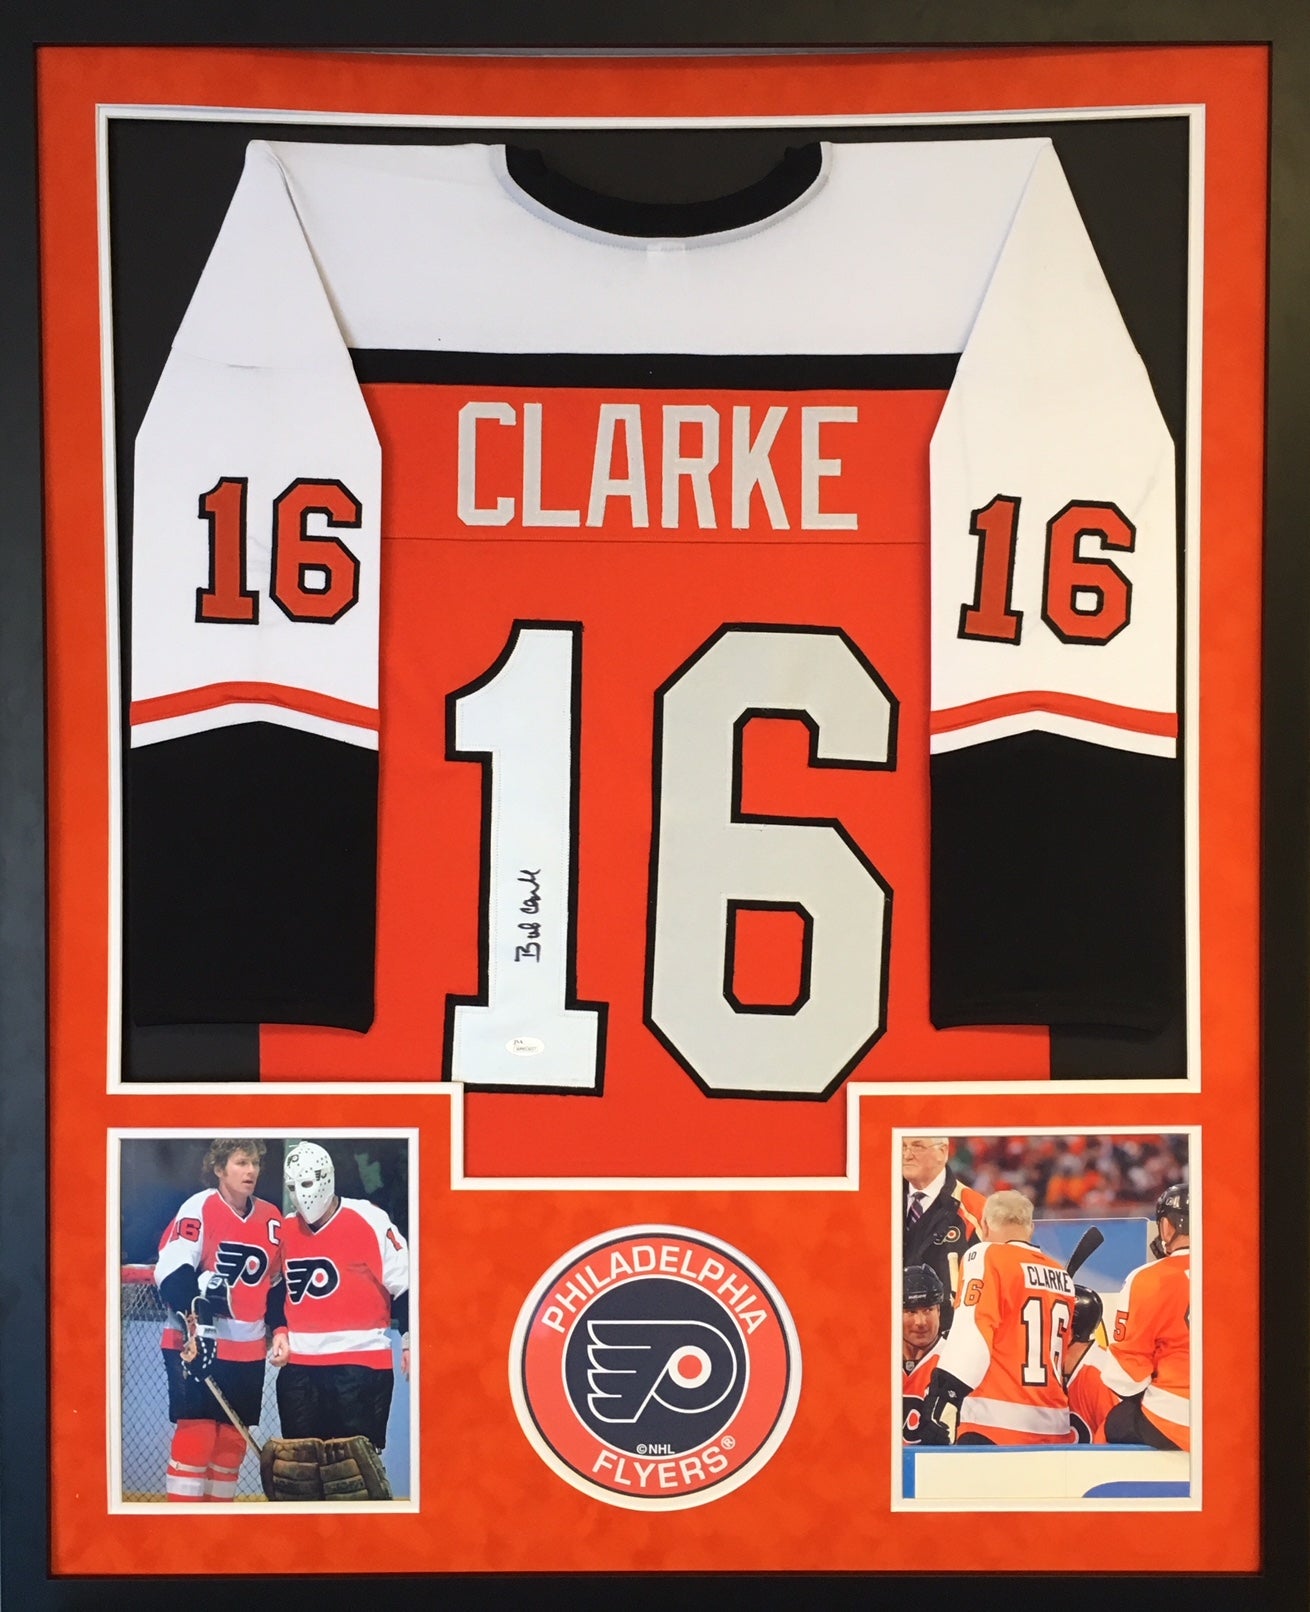 Deluxe Vertical Jersey Framing – Super Sports Center